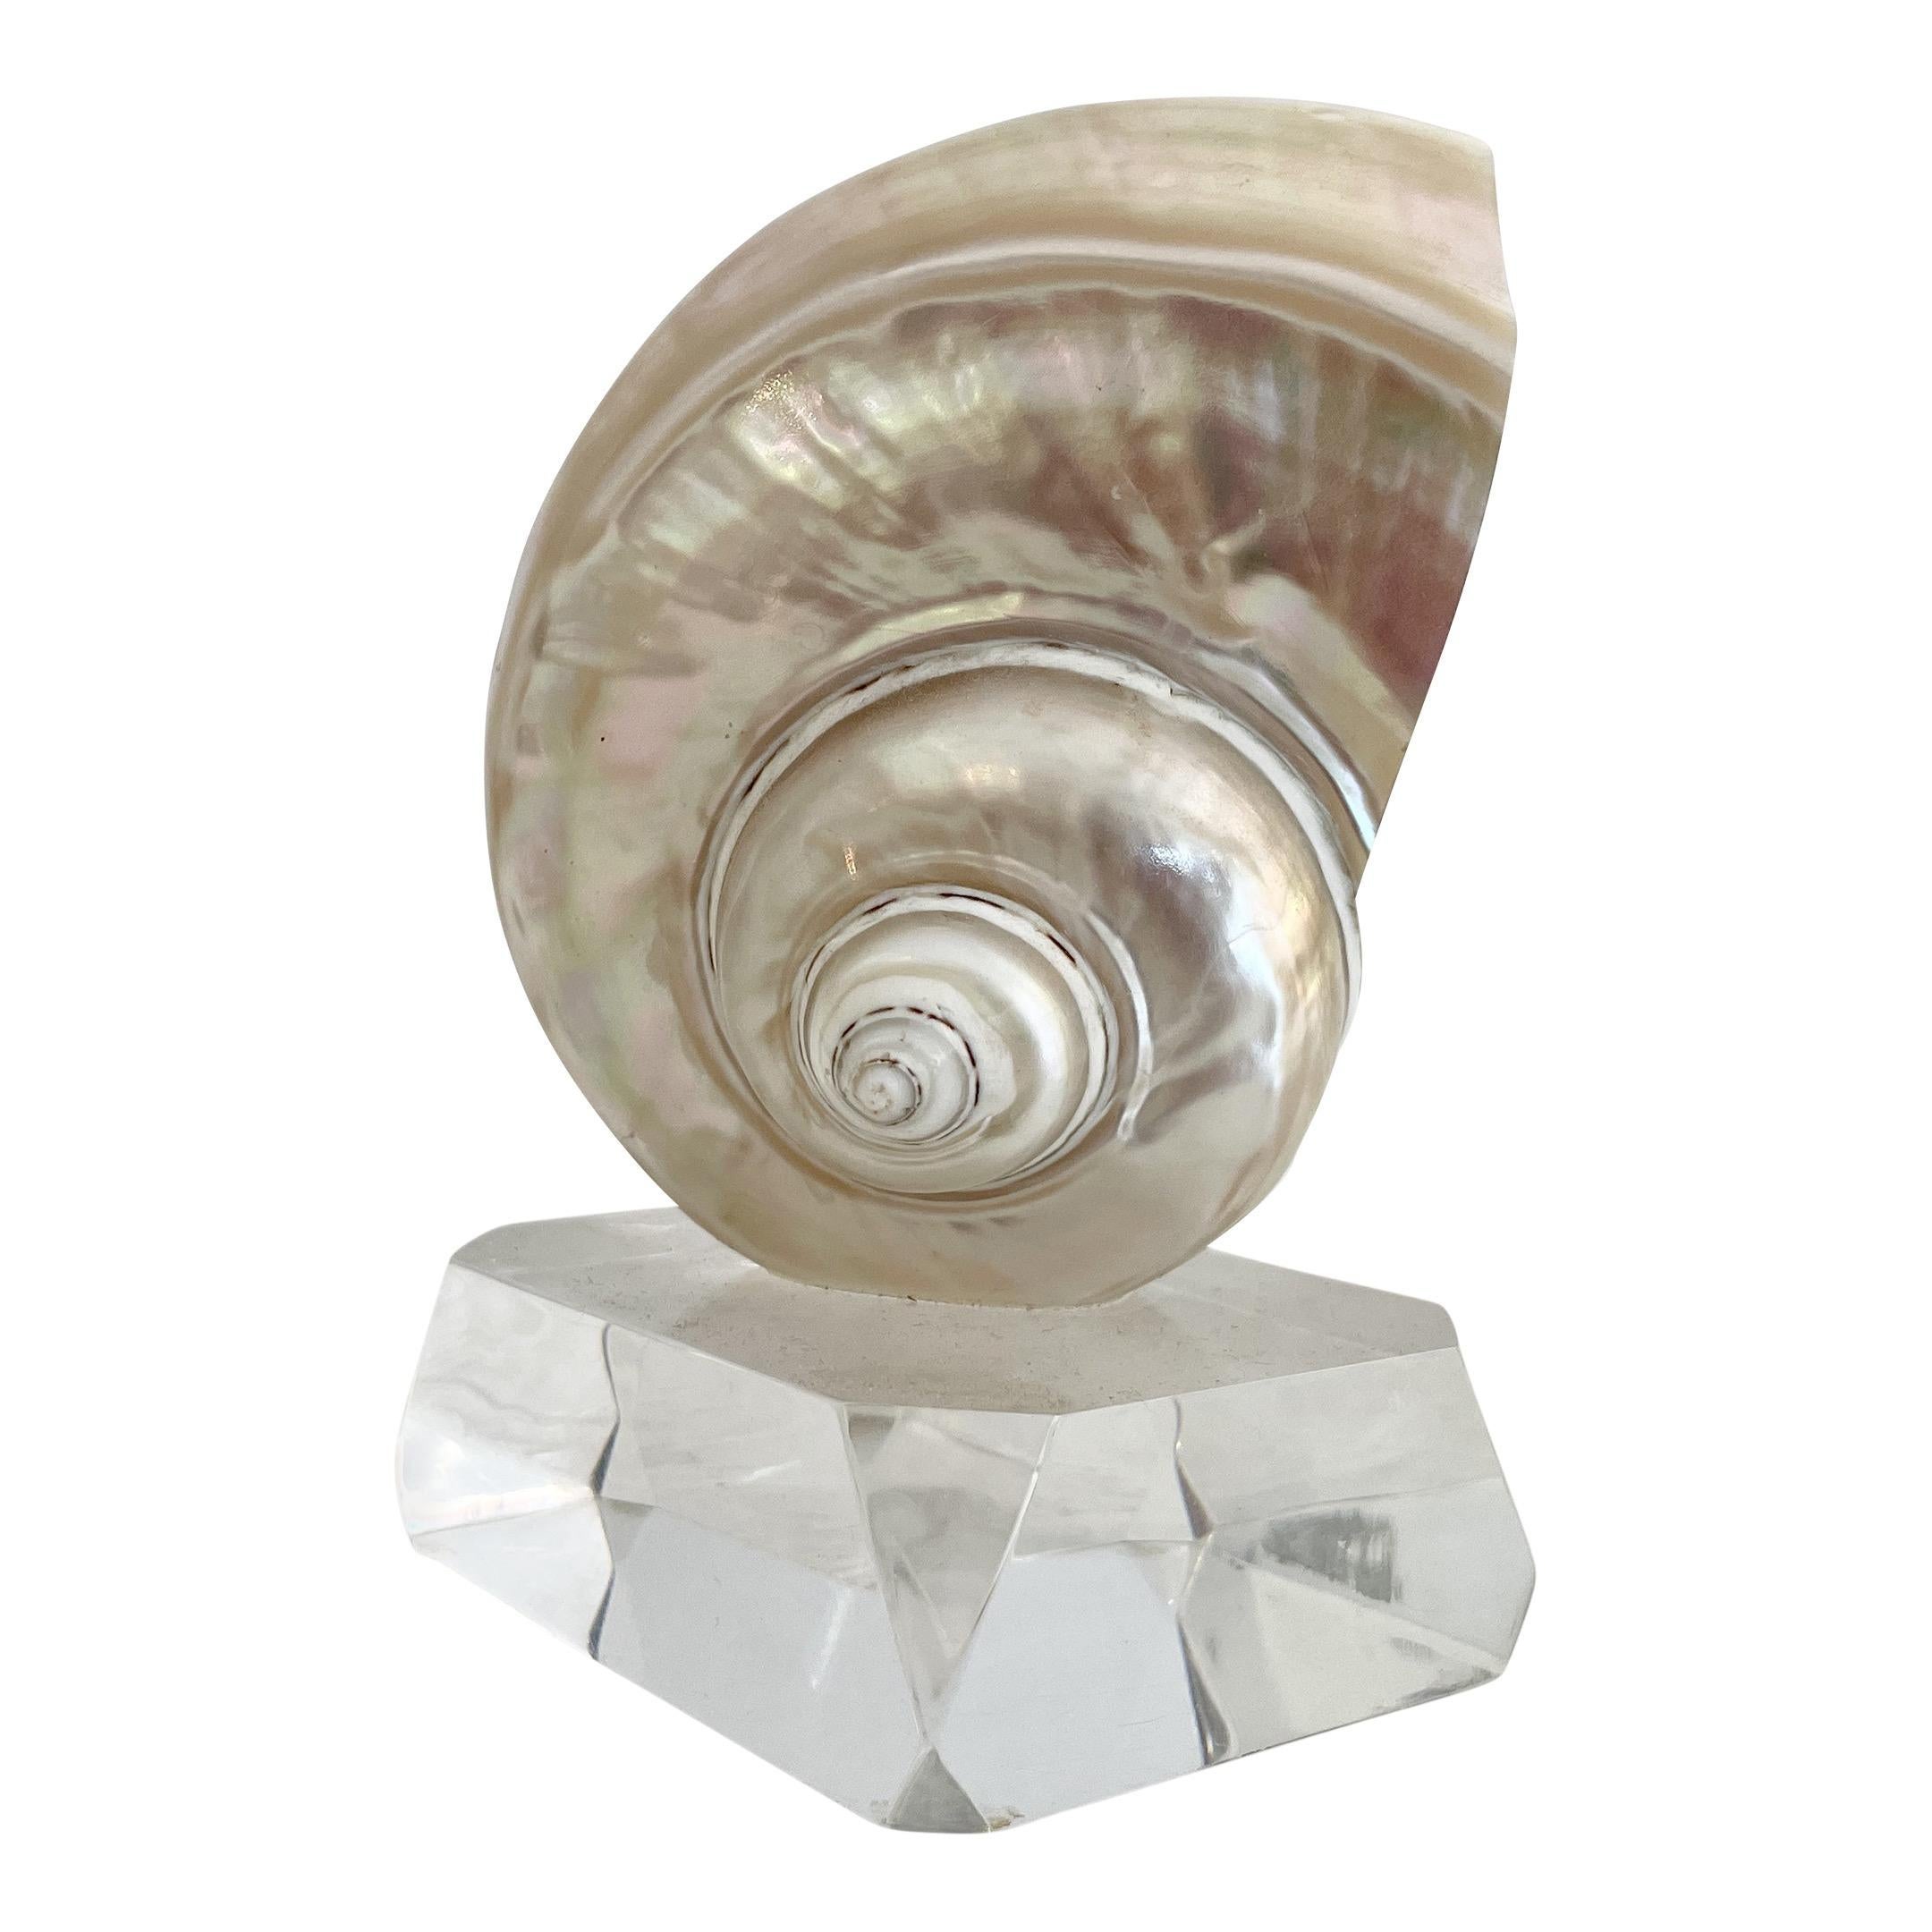 Shell on a Lucite Base